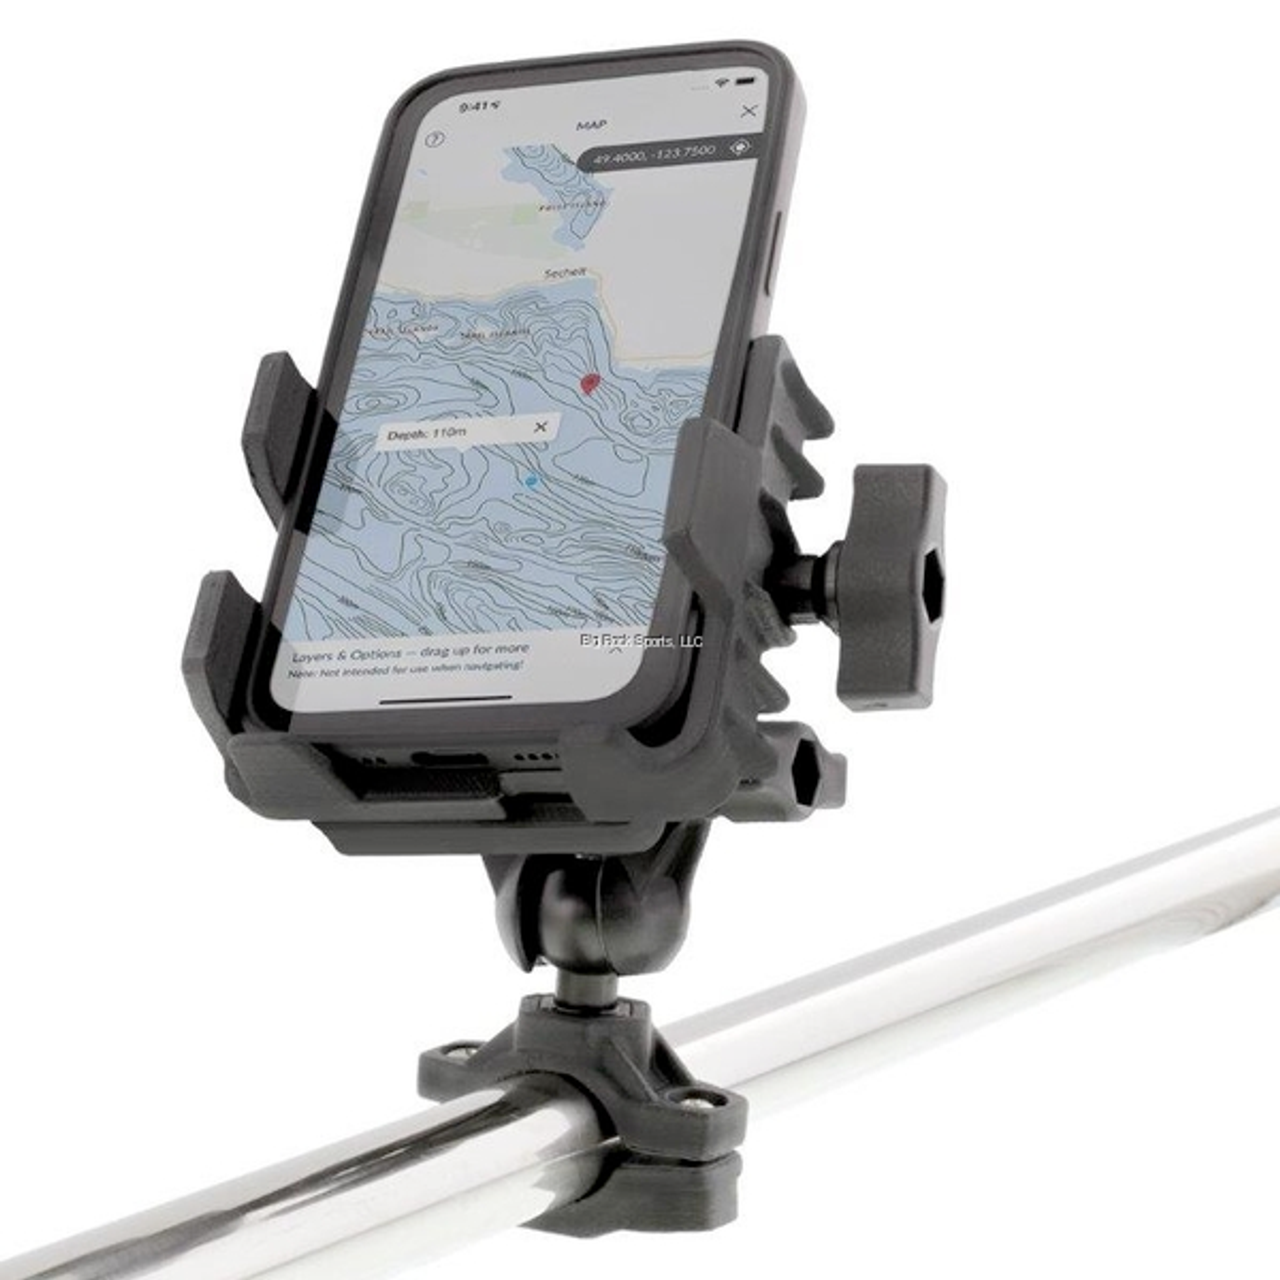 Scotty Phone Holder with Post, Track, and Rail Mounts